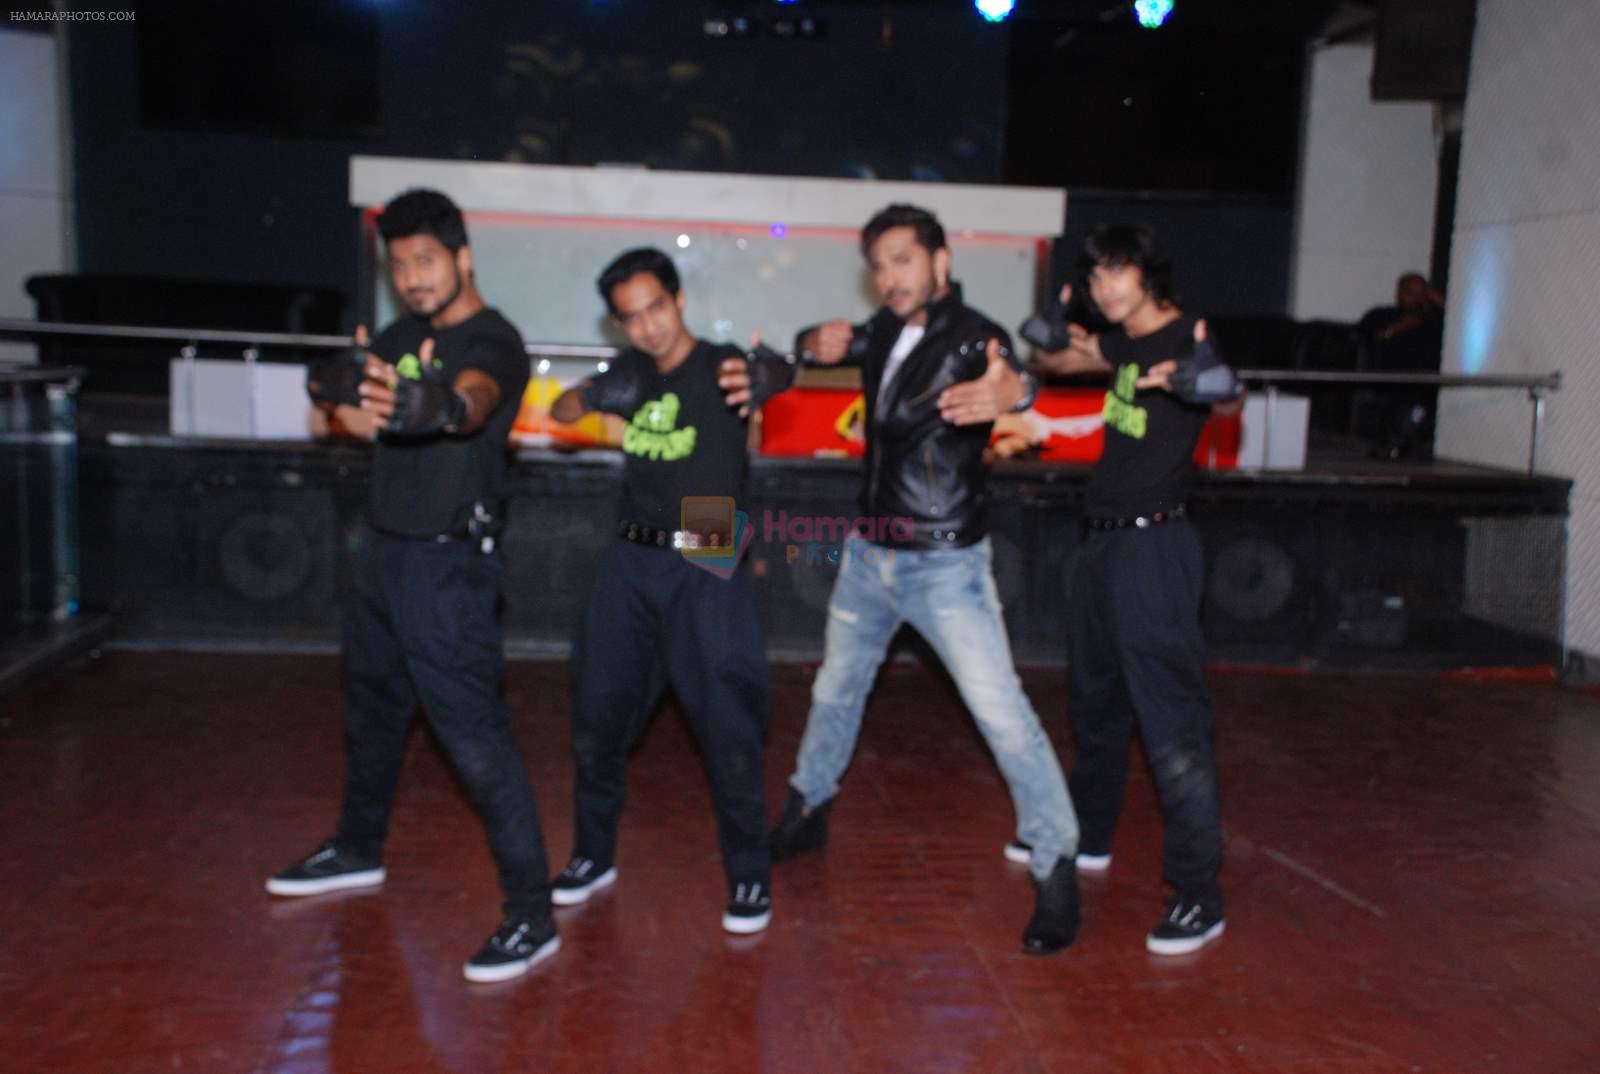 Terence Lewis at Bindass Tv Shoot on 15th June 2015